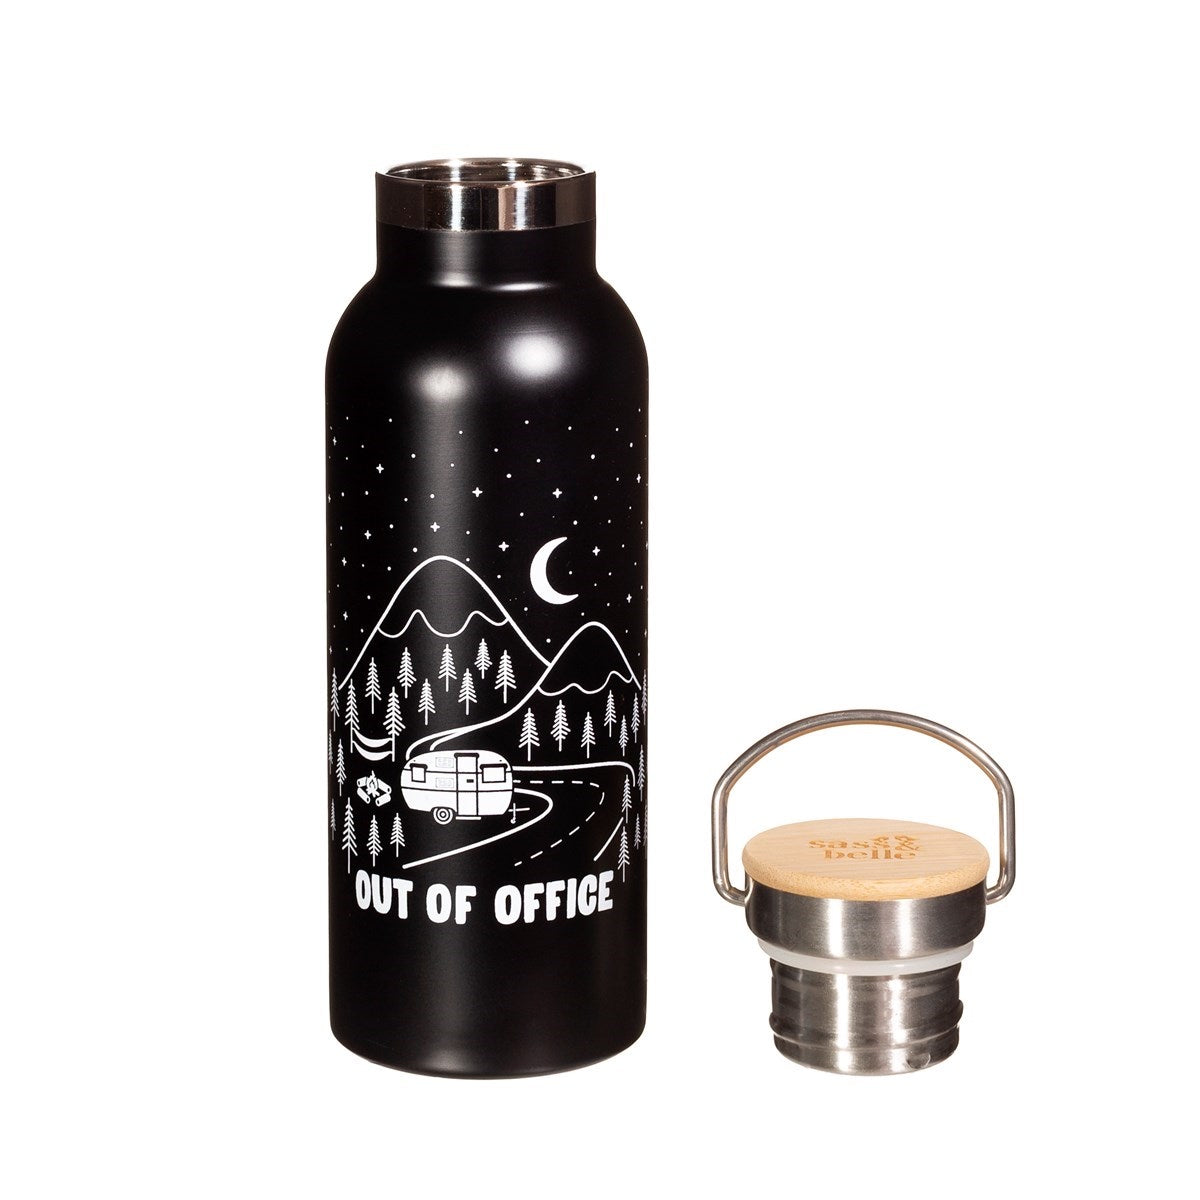 Out of office stainless steel water bottle by Sass & Belle